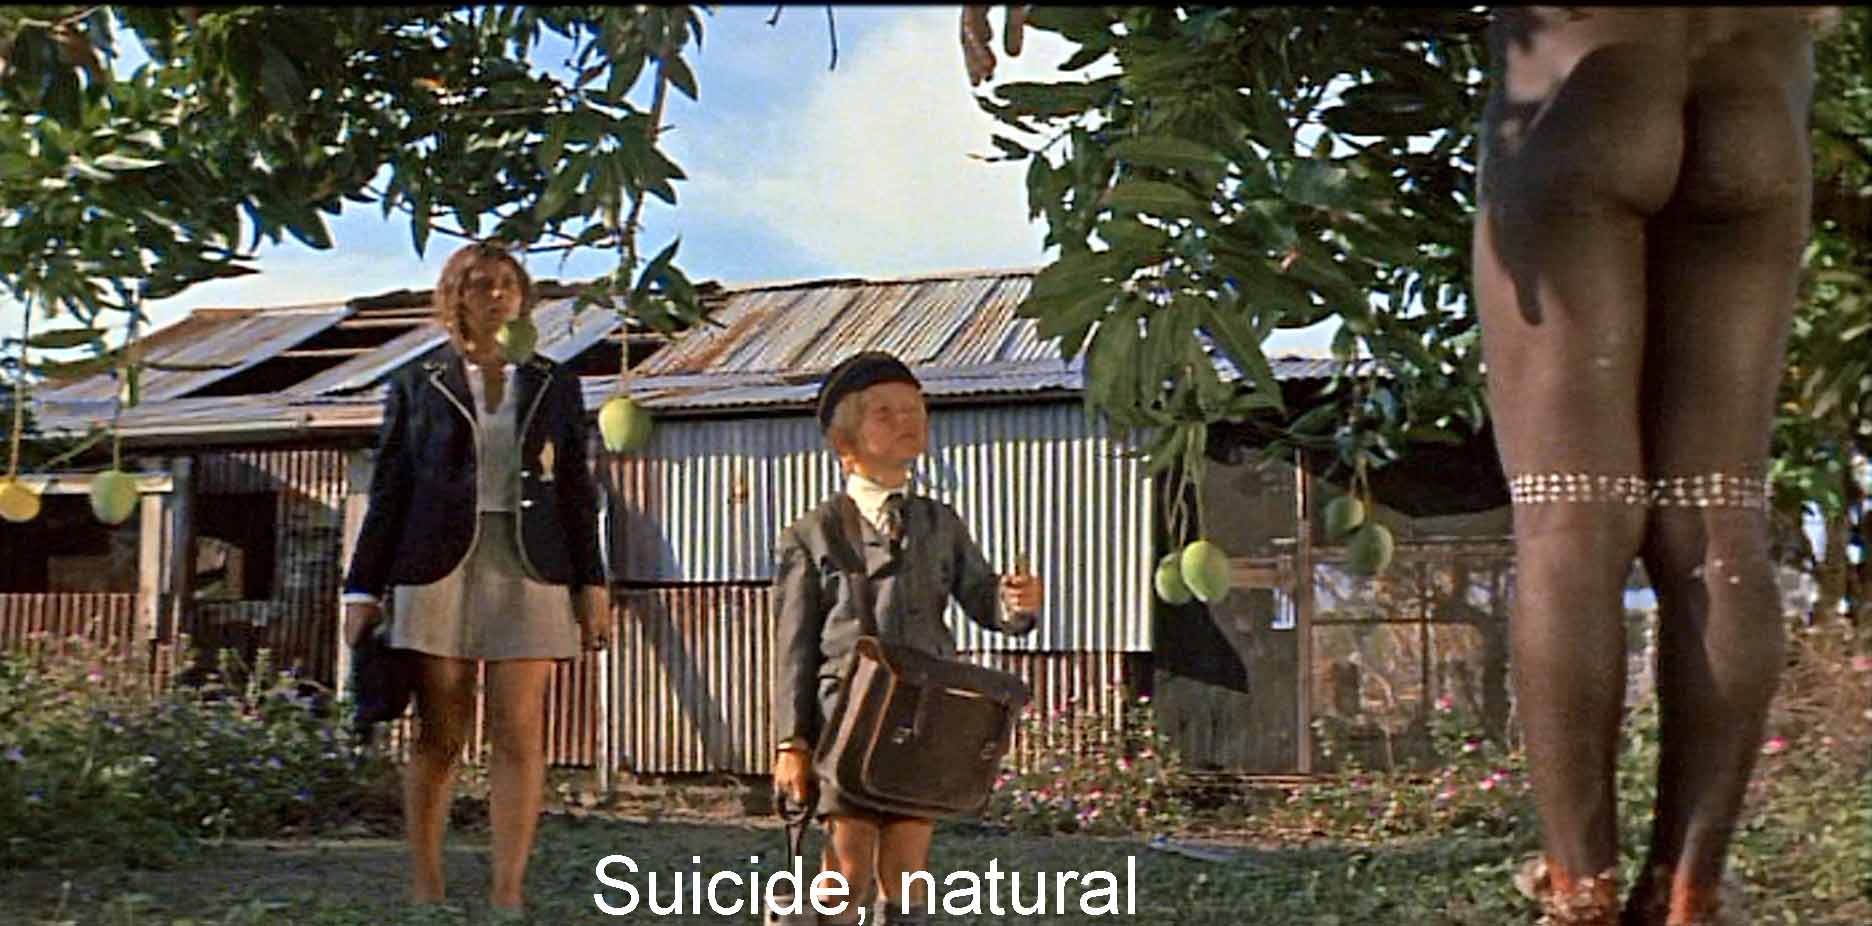 Suicide, natural